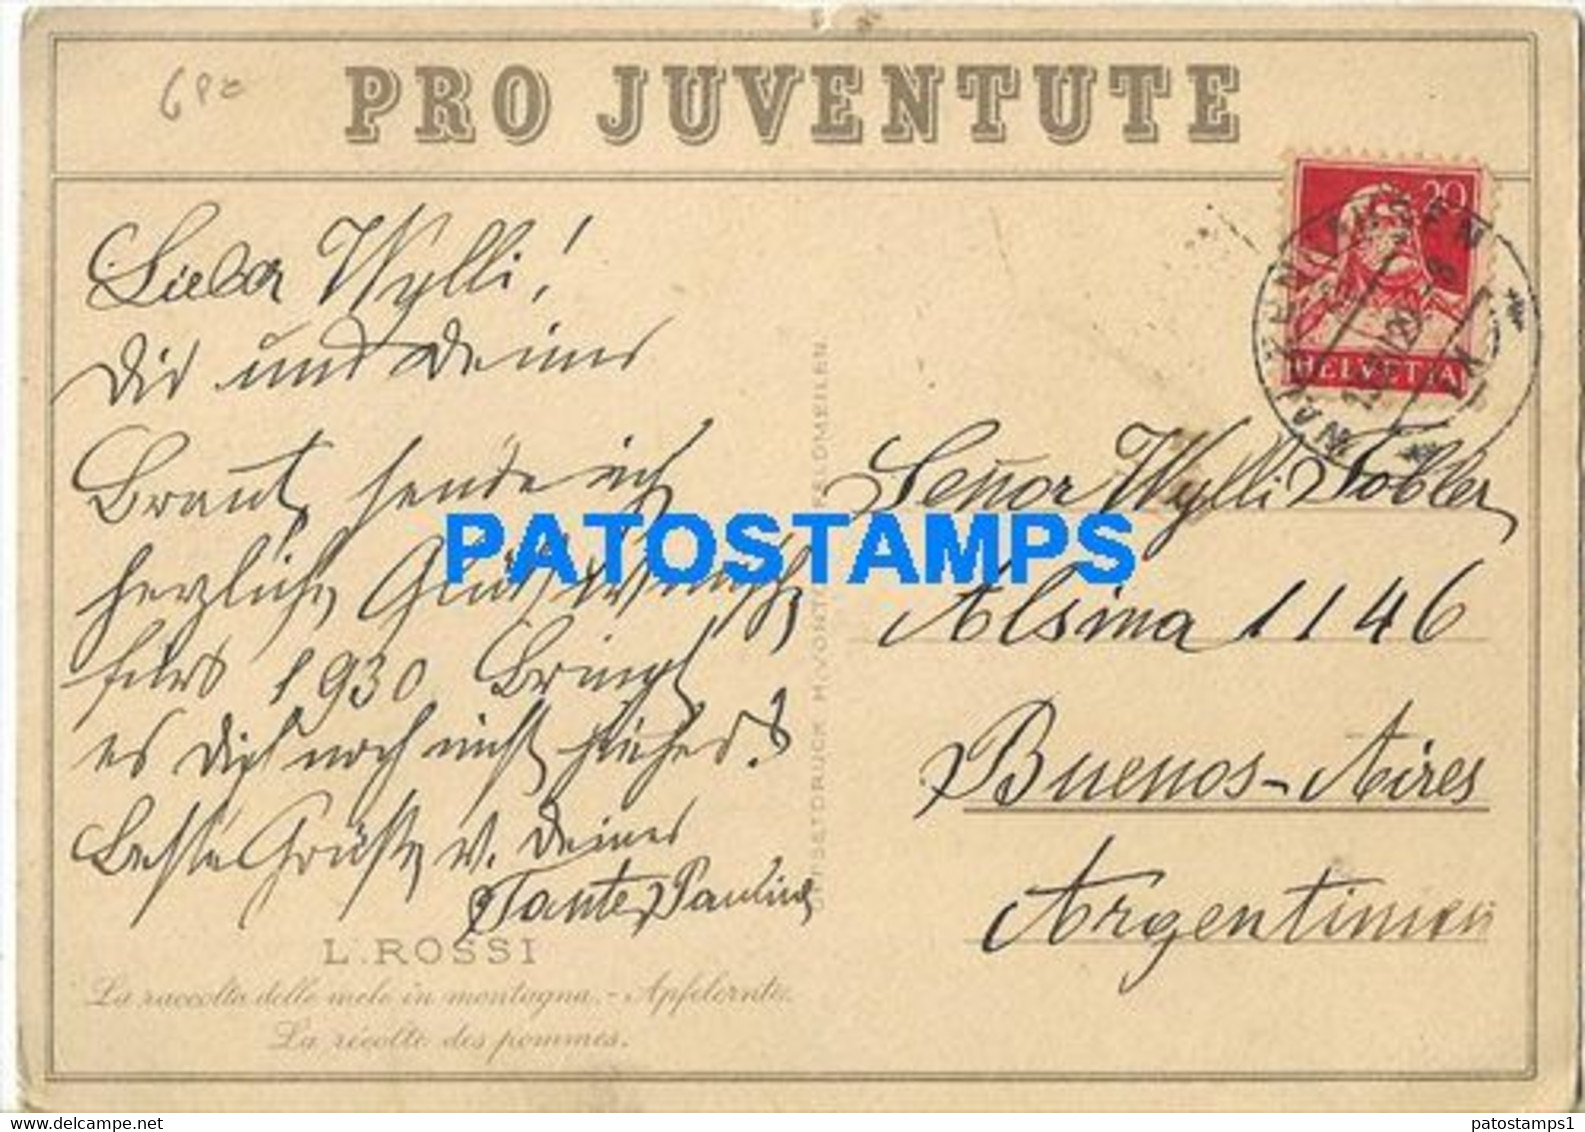 174628 SWITZERLAND ART SIGNED L. ROSSI HARVESTING APPLES PRO JUVENTUTE CIRCULATED TO ARGENTINA POSTAL POSTCARD - Apples